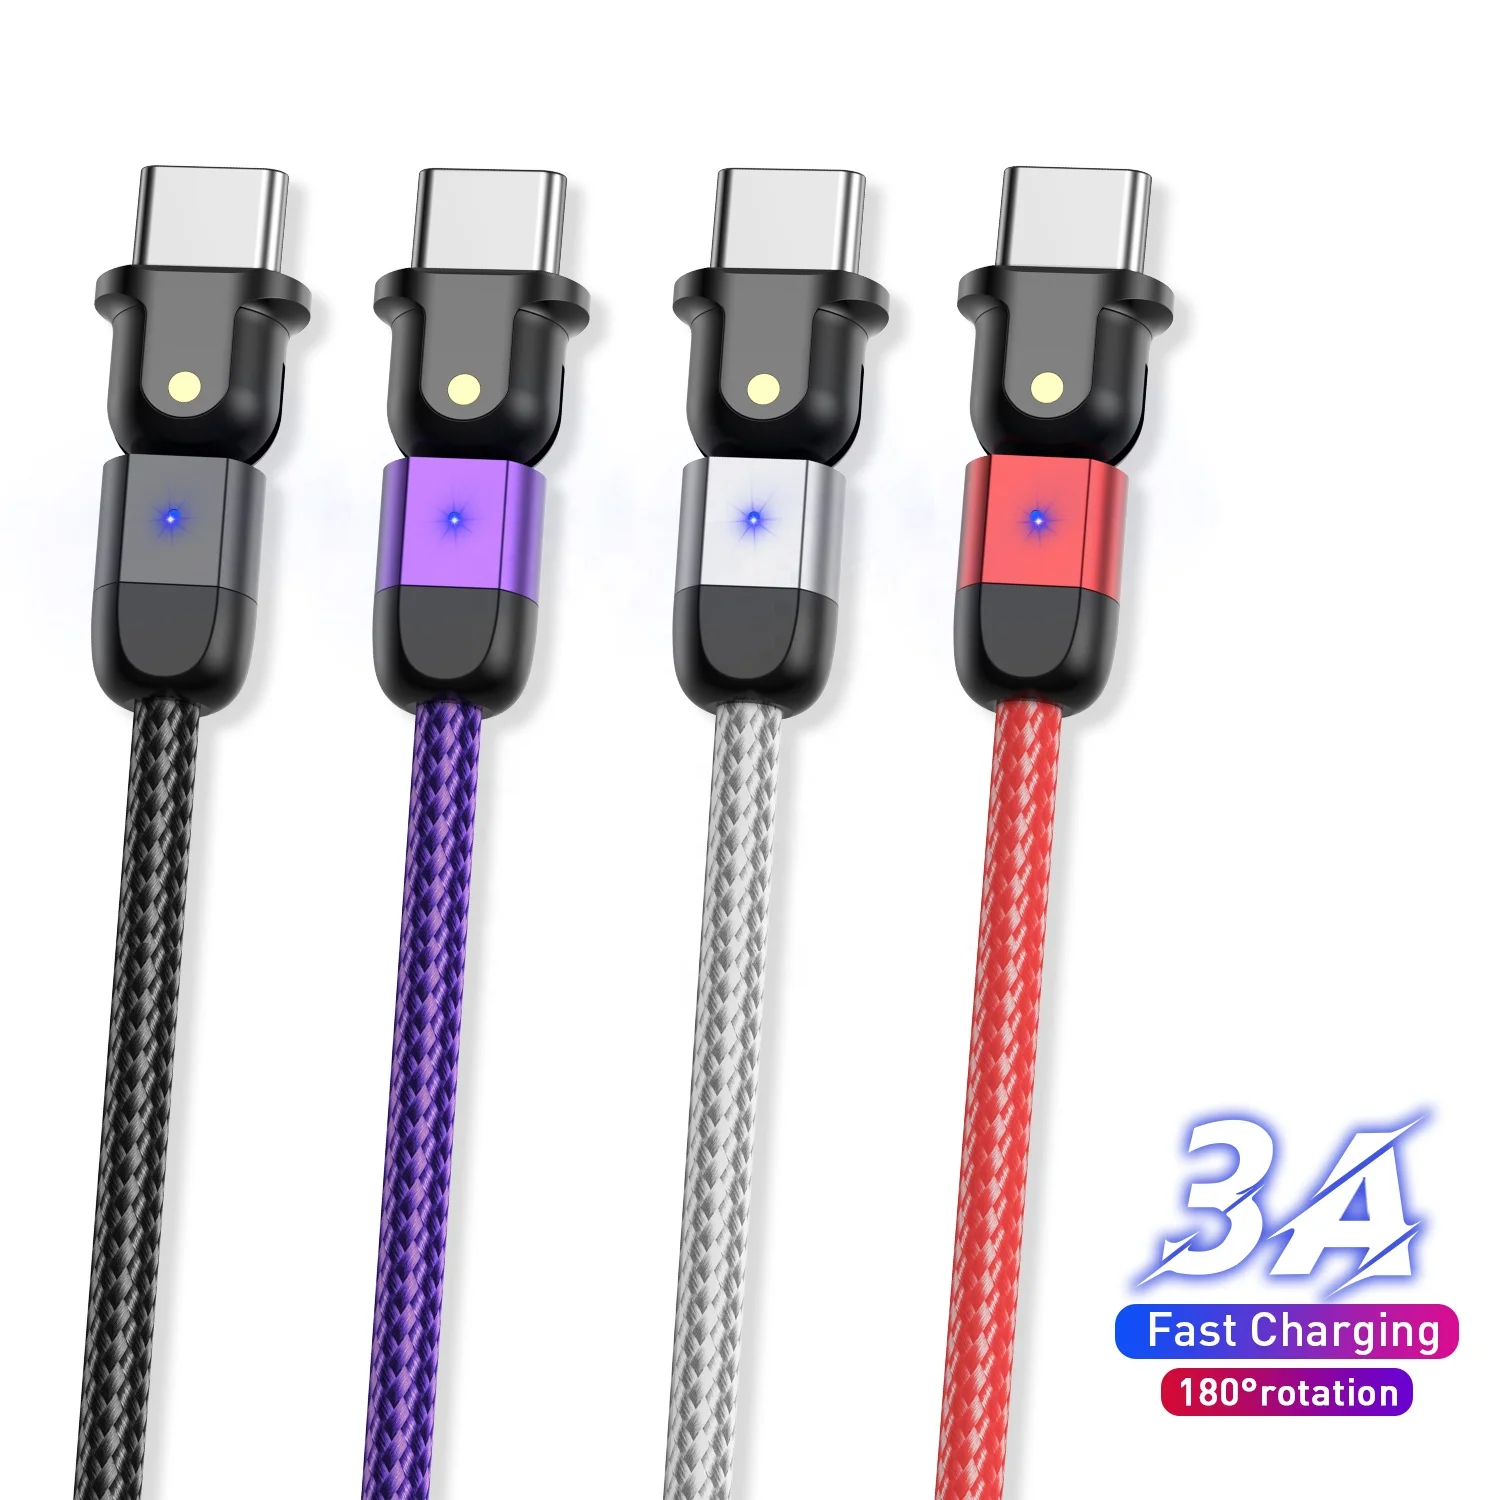 

USLION 0.5m/1m/2m New Arrival 3A Fast charge 180 degree rotation type c usb cable Charging data cable for Android phone, Black, red,silver,purple